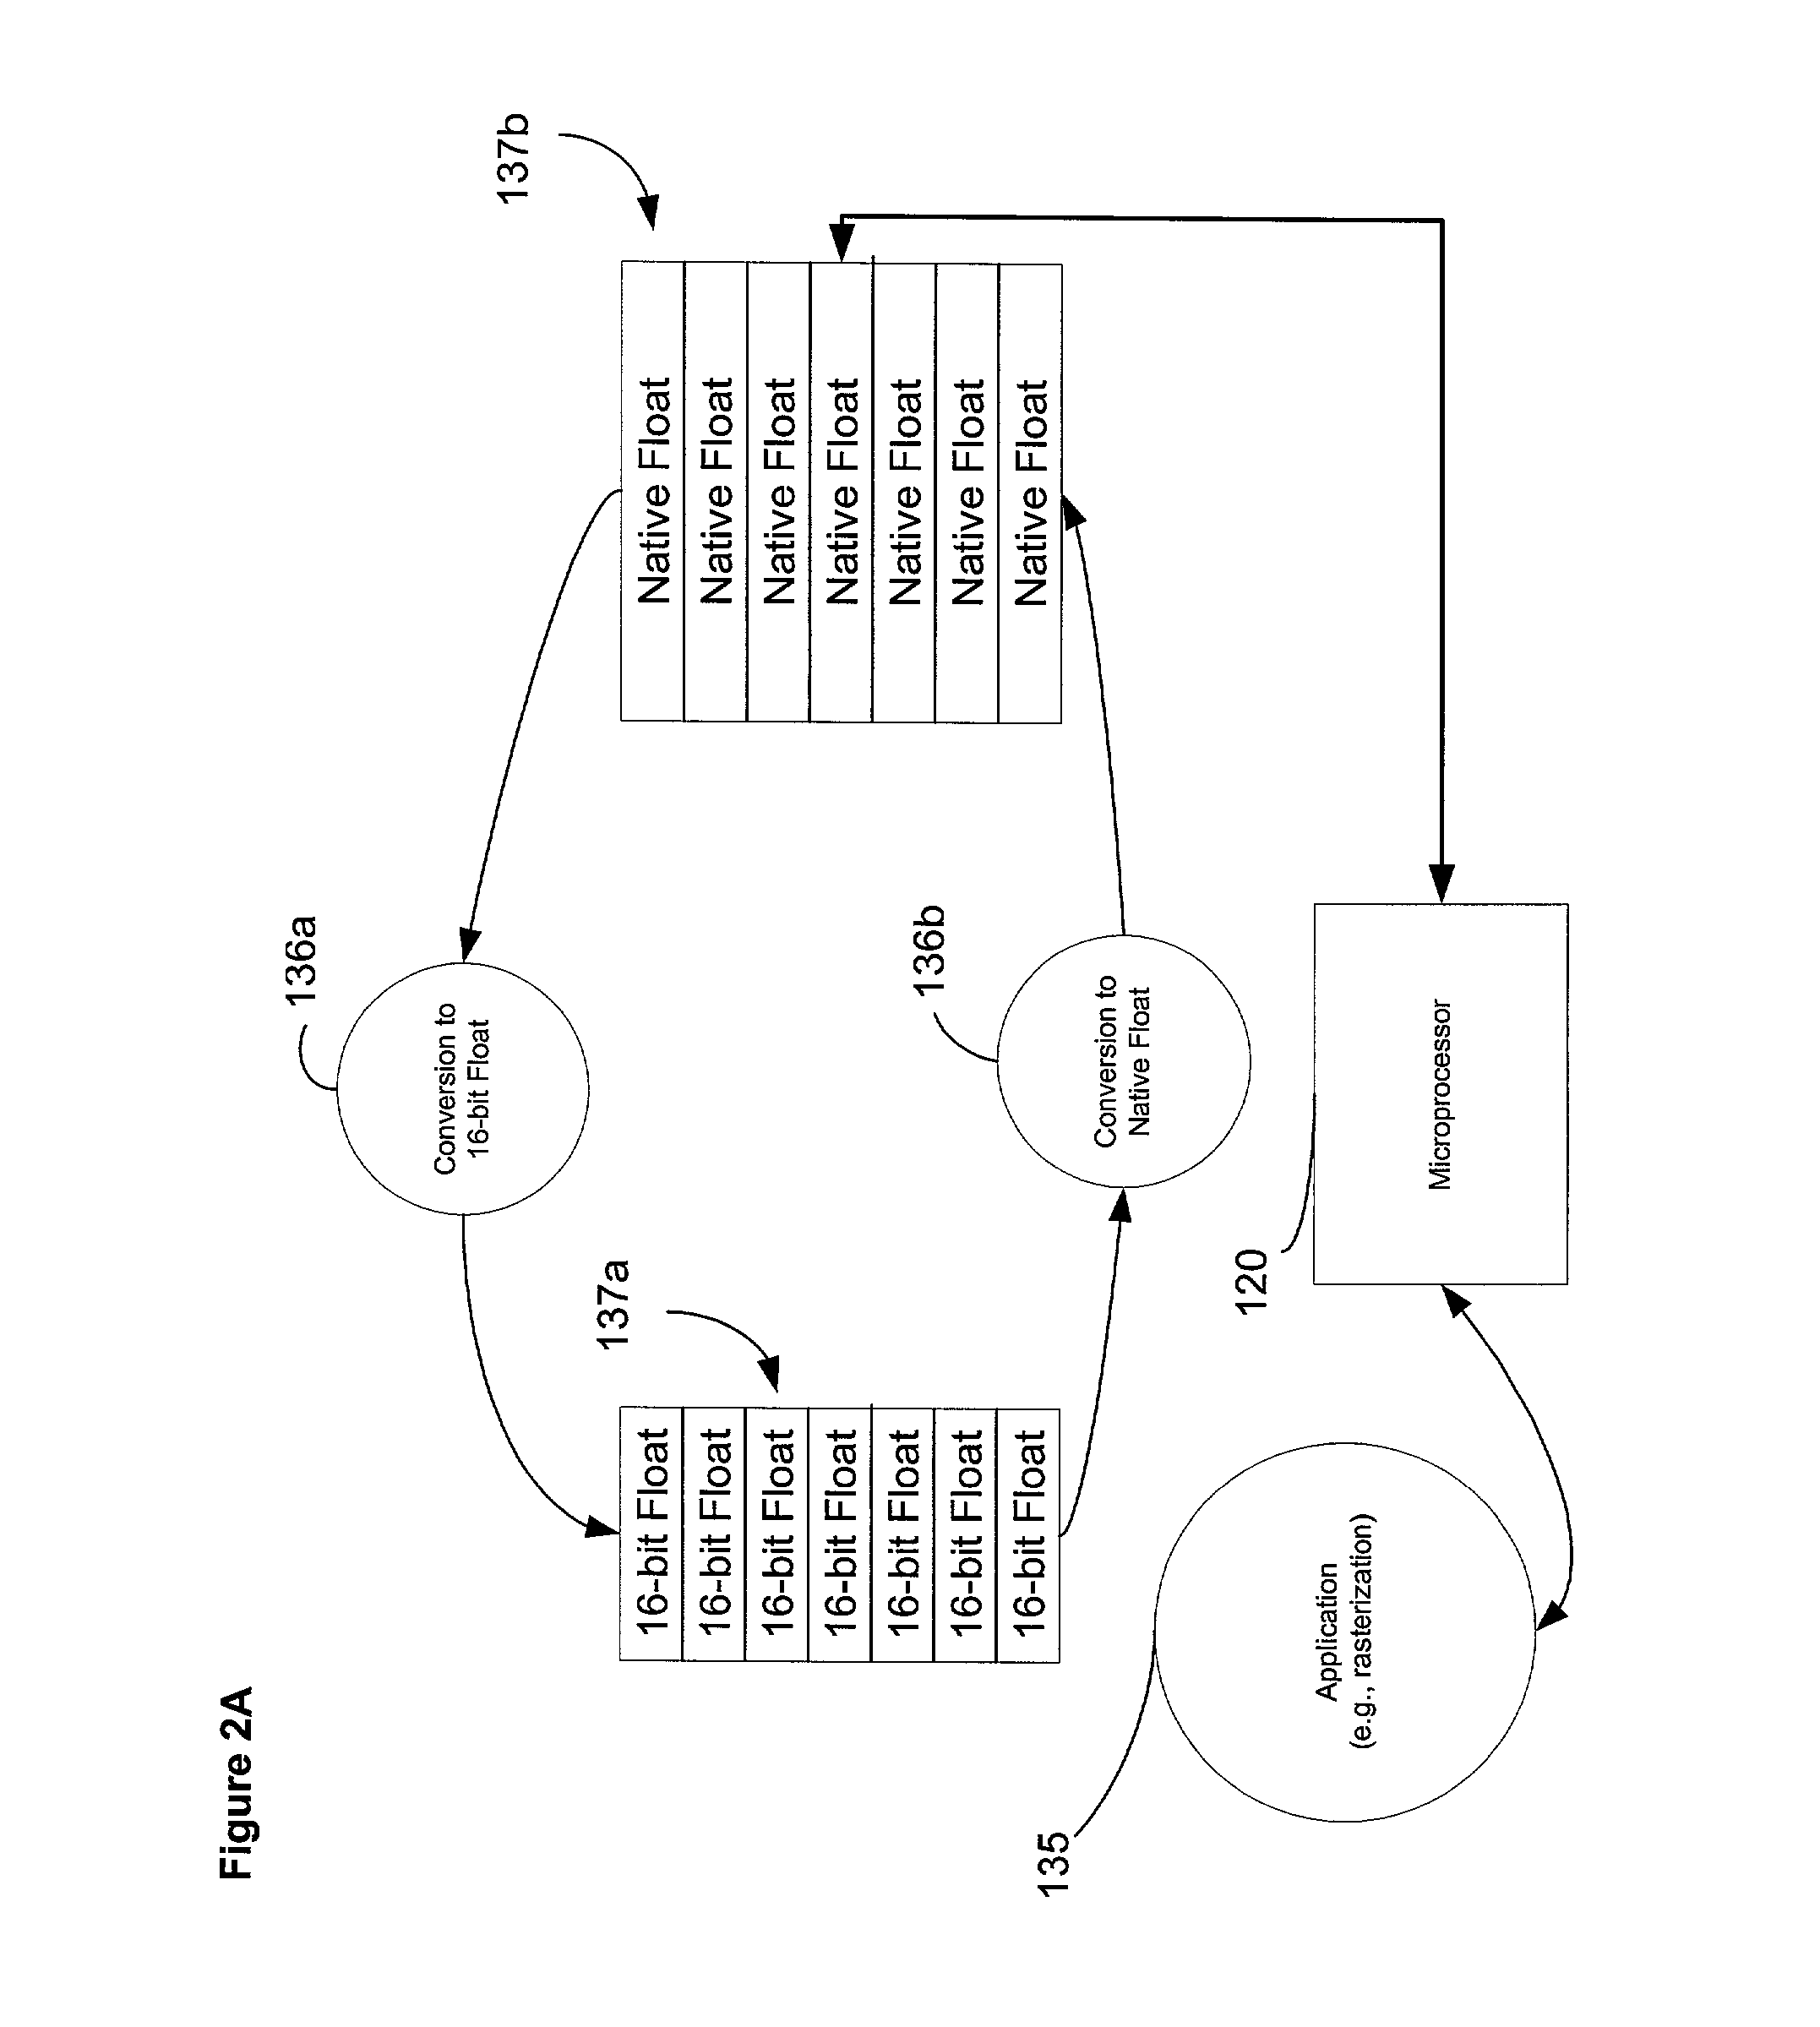 System and method for using native floating point microprocessor instructions to manipulate 16-bit floating point data representations